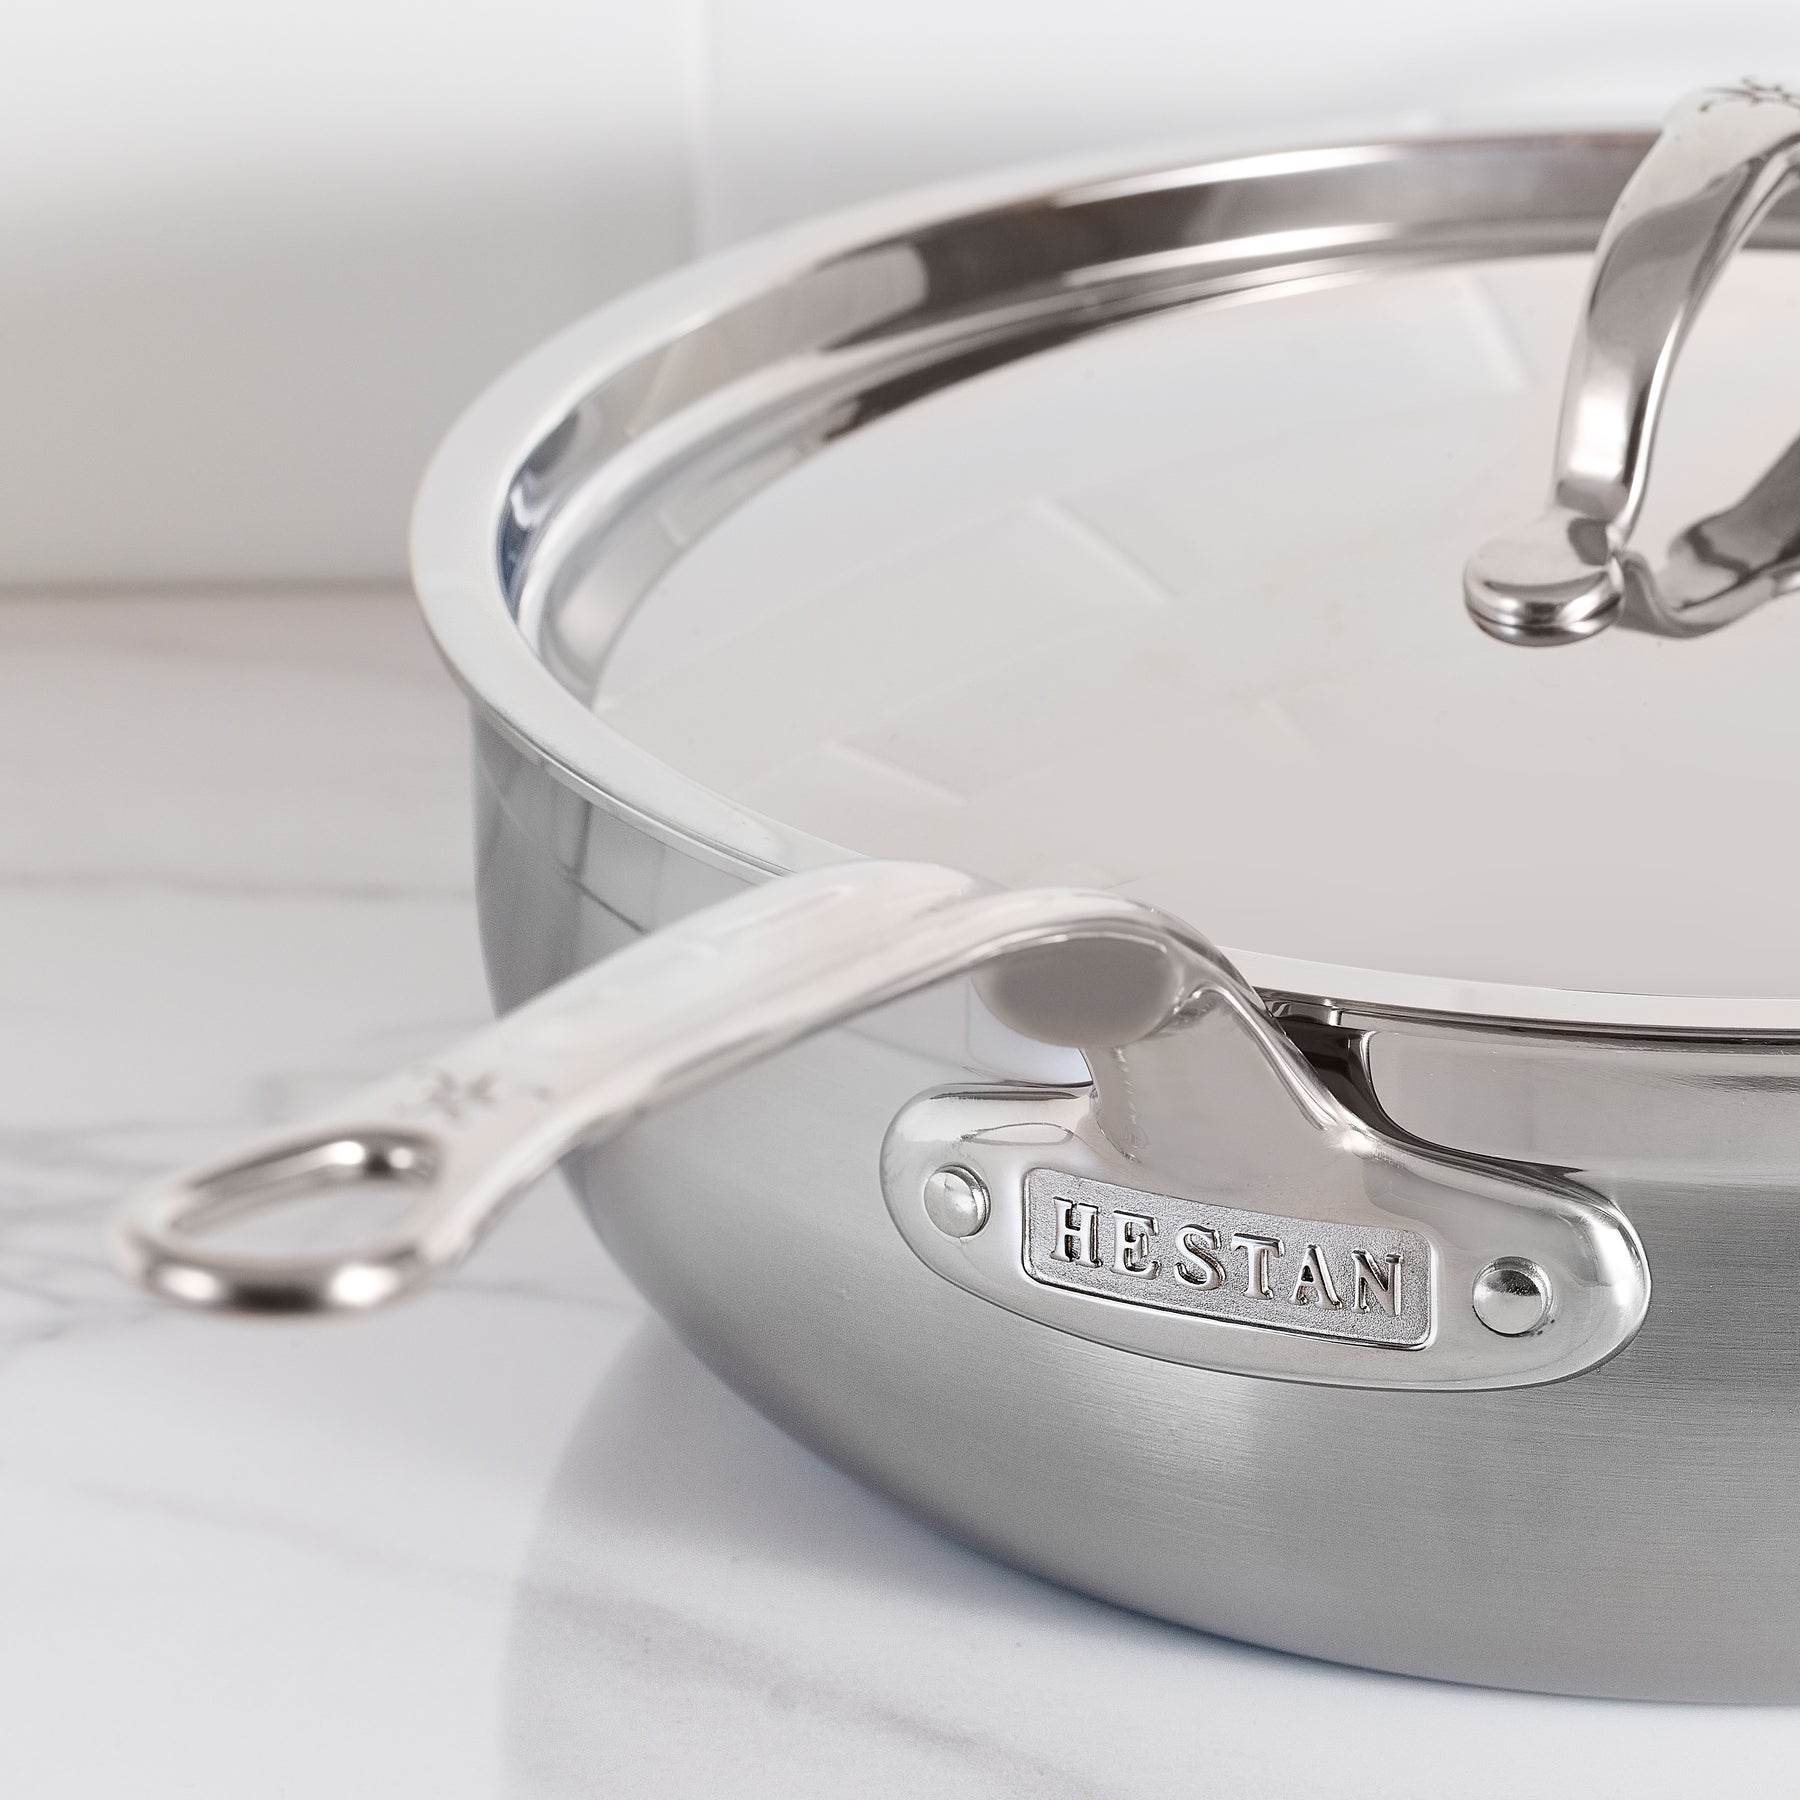 Professional Clad Stainless Steel Stockpot, 8-Quart – Hestan Culinary